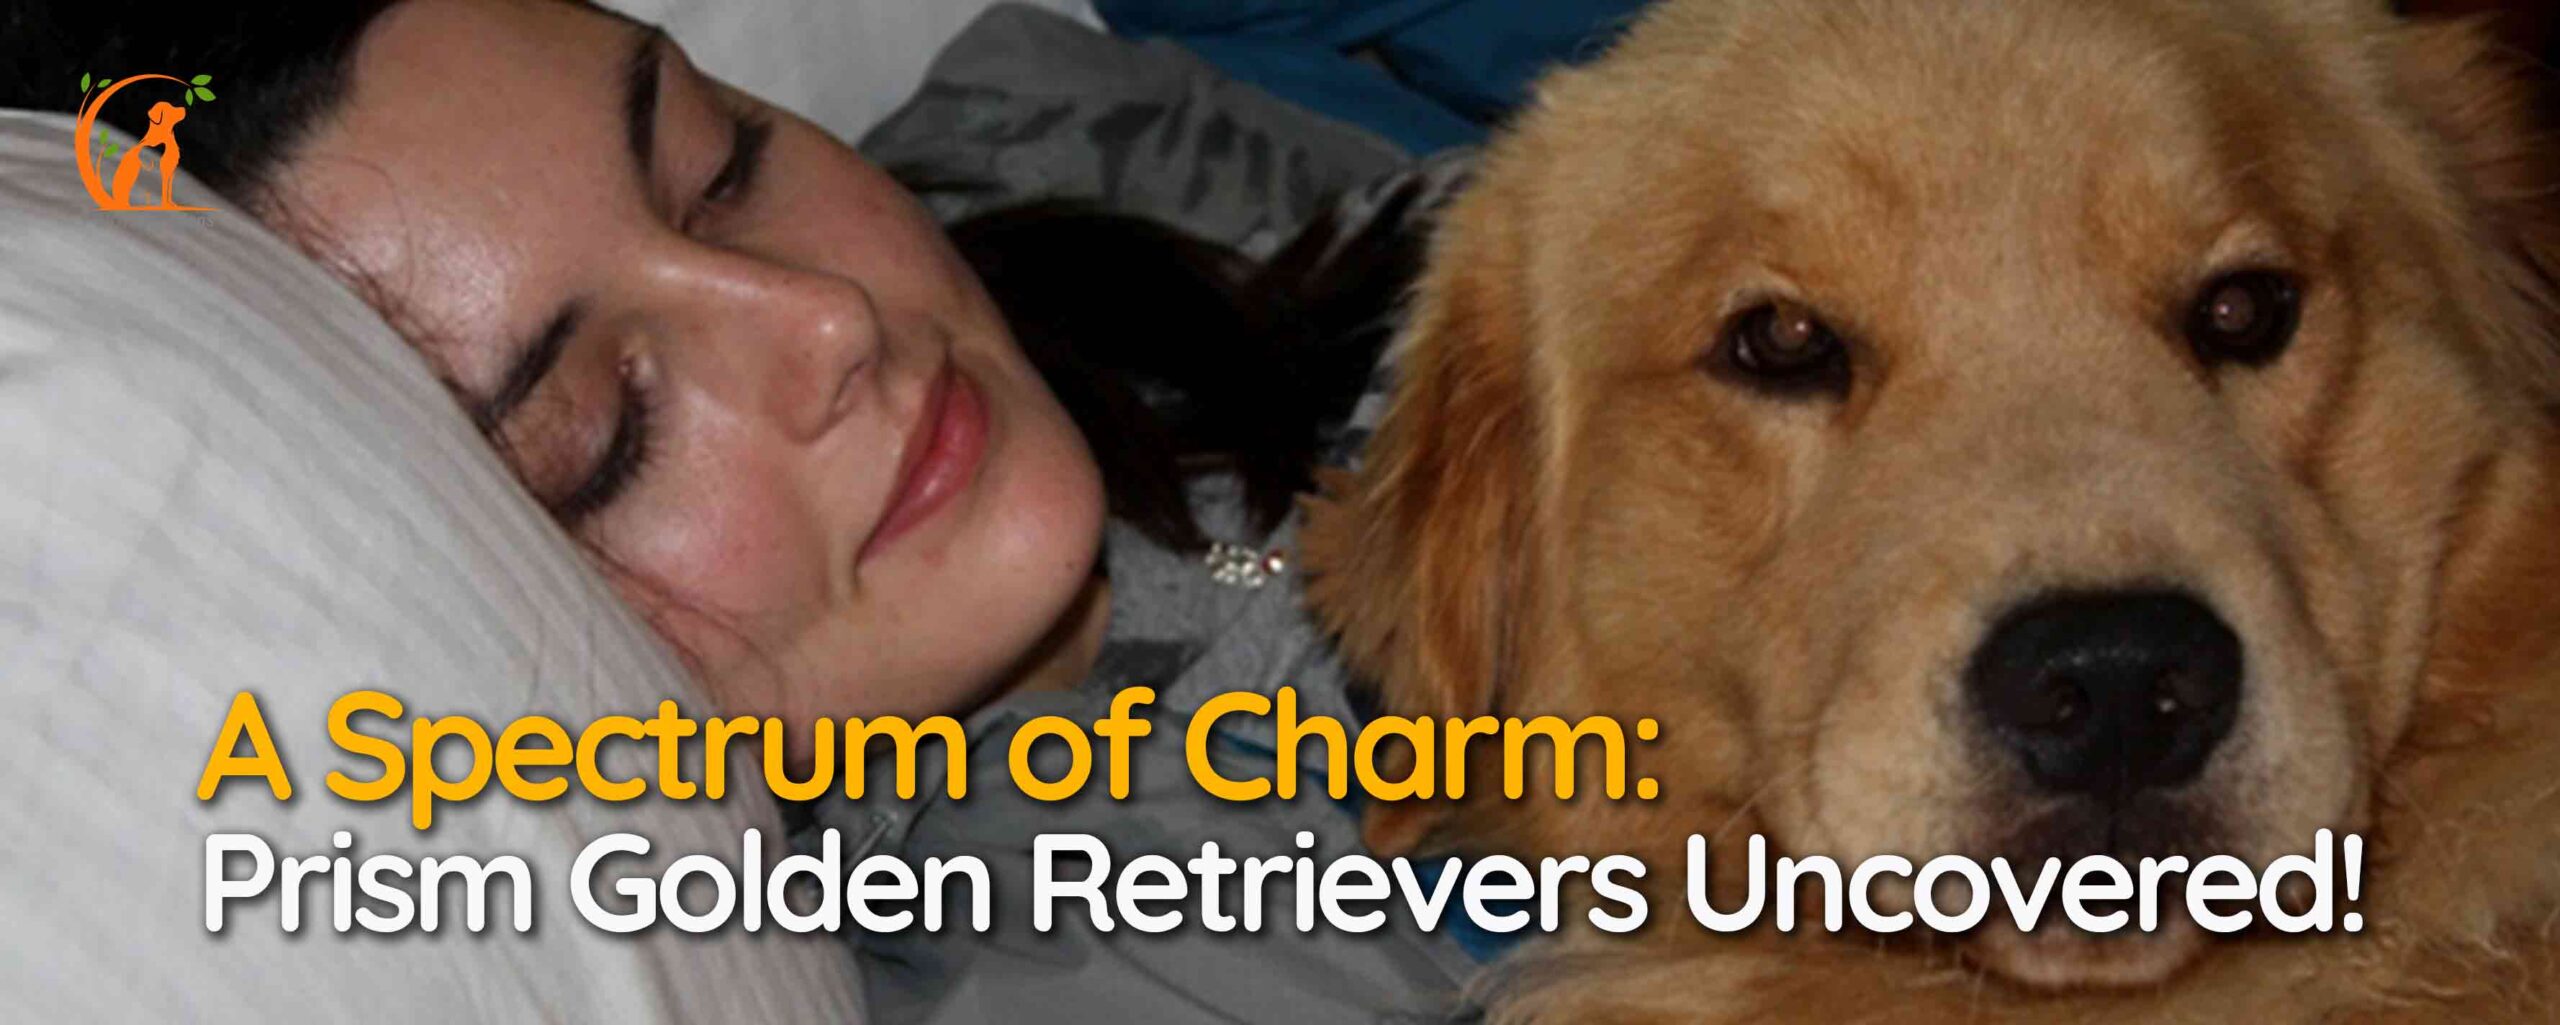 A Spectrum of Charm: Prism Golden Retrievers Uncovered!